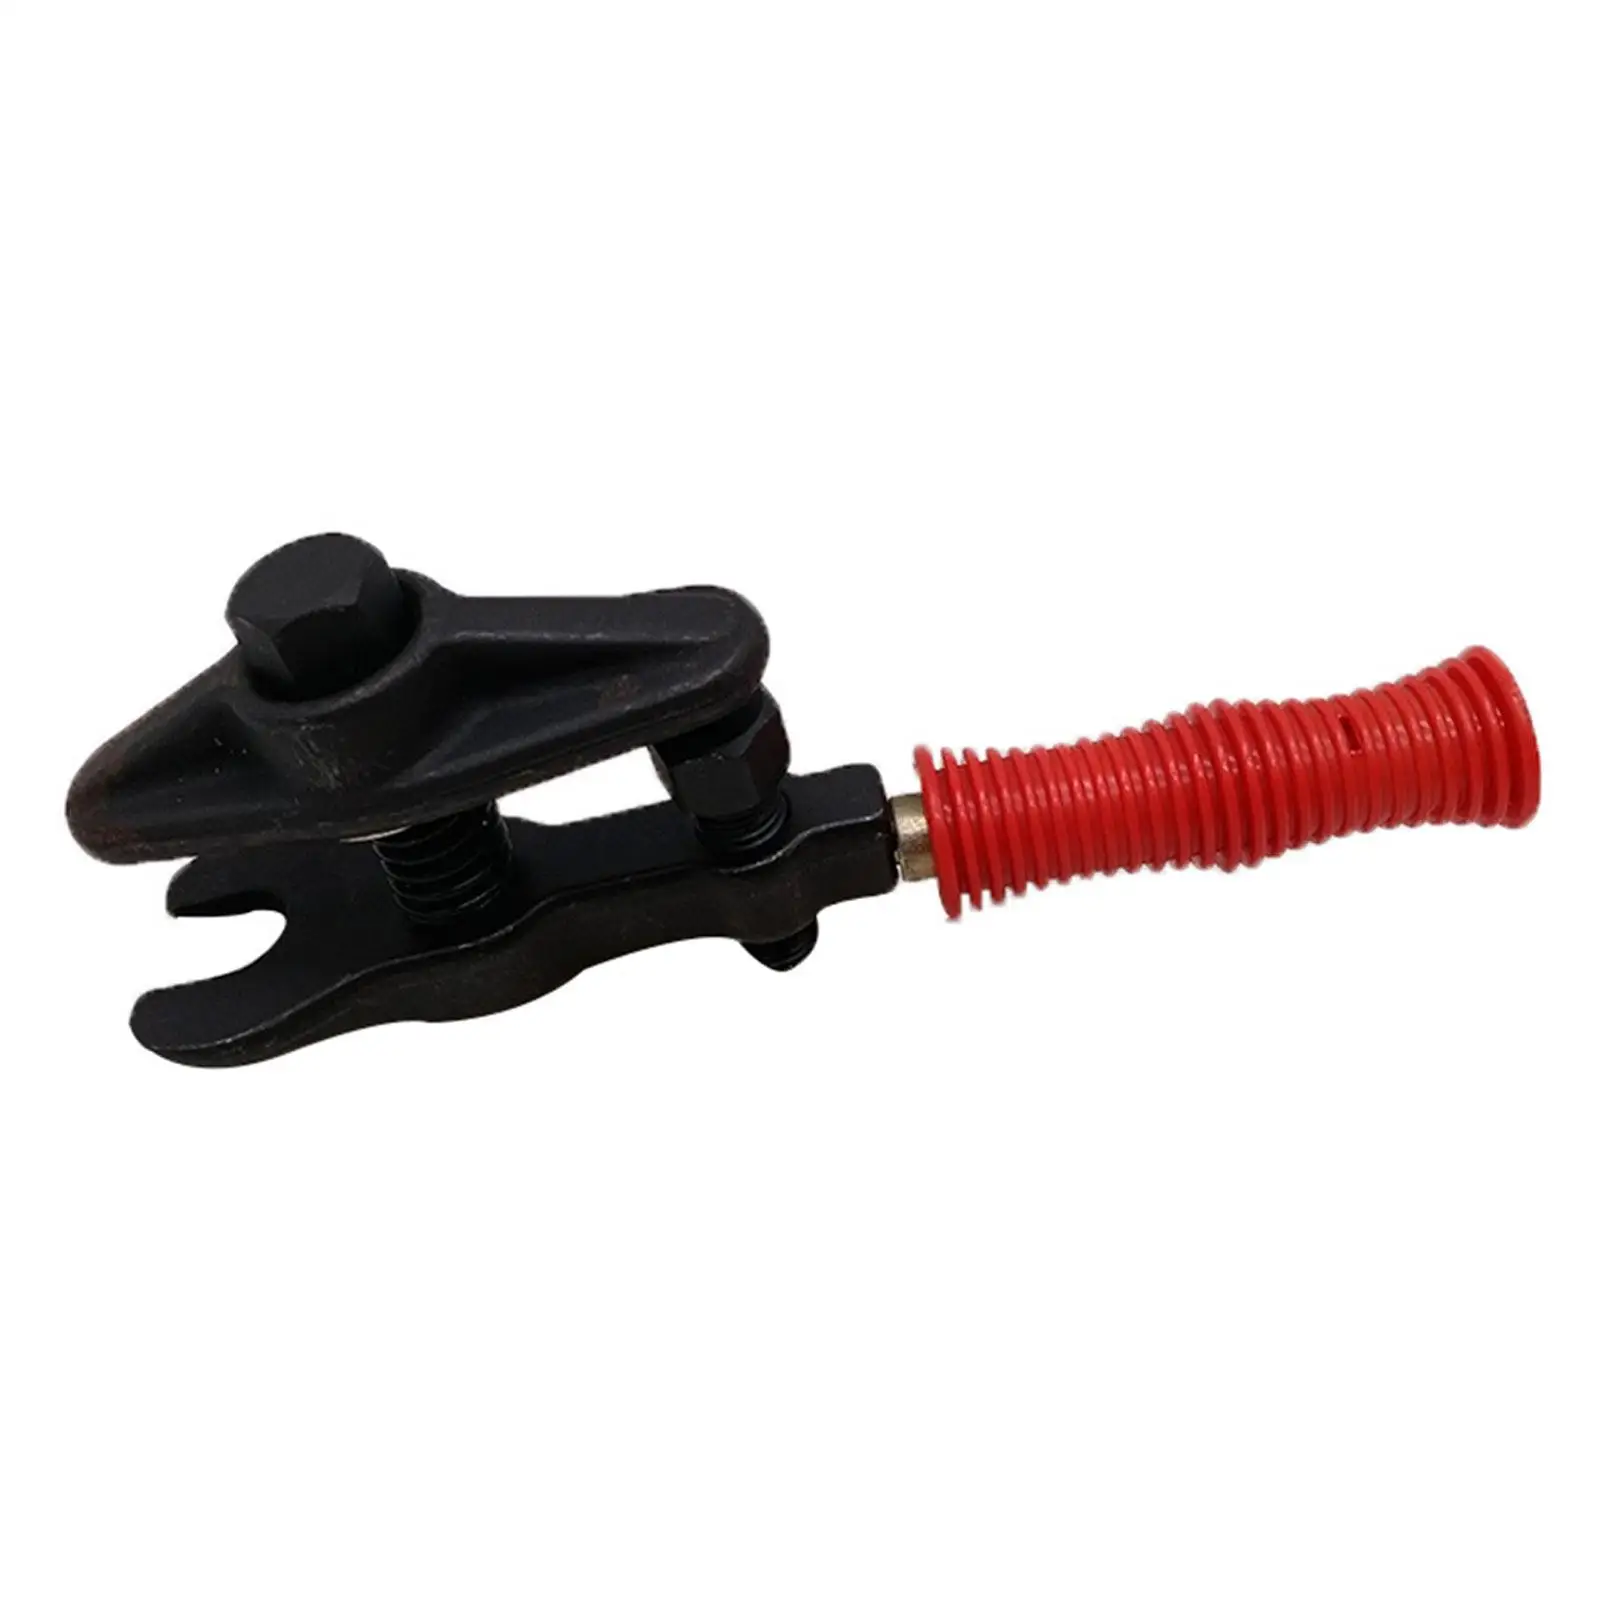 Ball Joint Separator Removal Tool with Splitting Ball Points Anti Roll Bar Mountings Professional for Car Truck SUV Sturdy